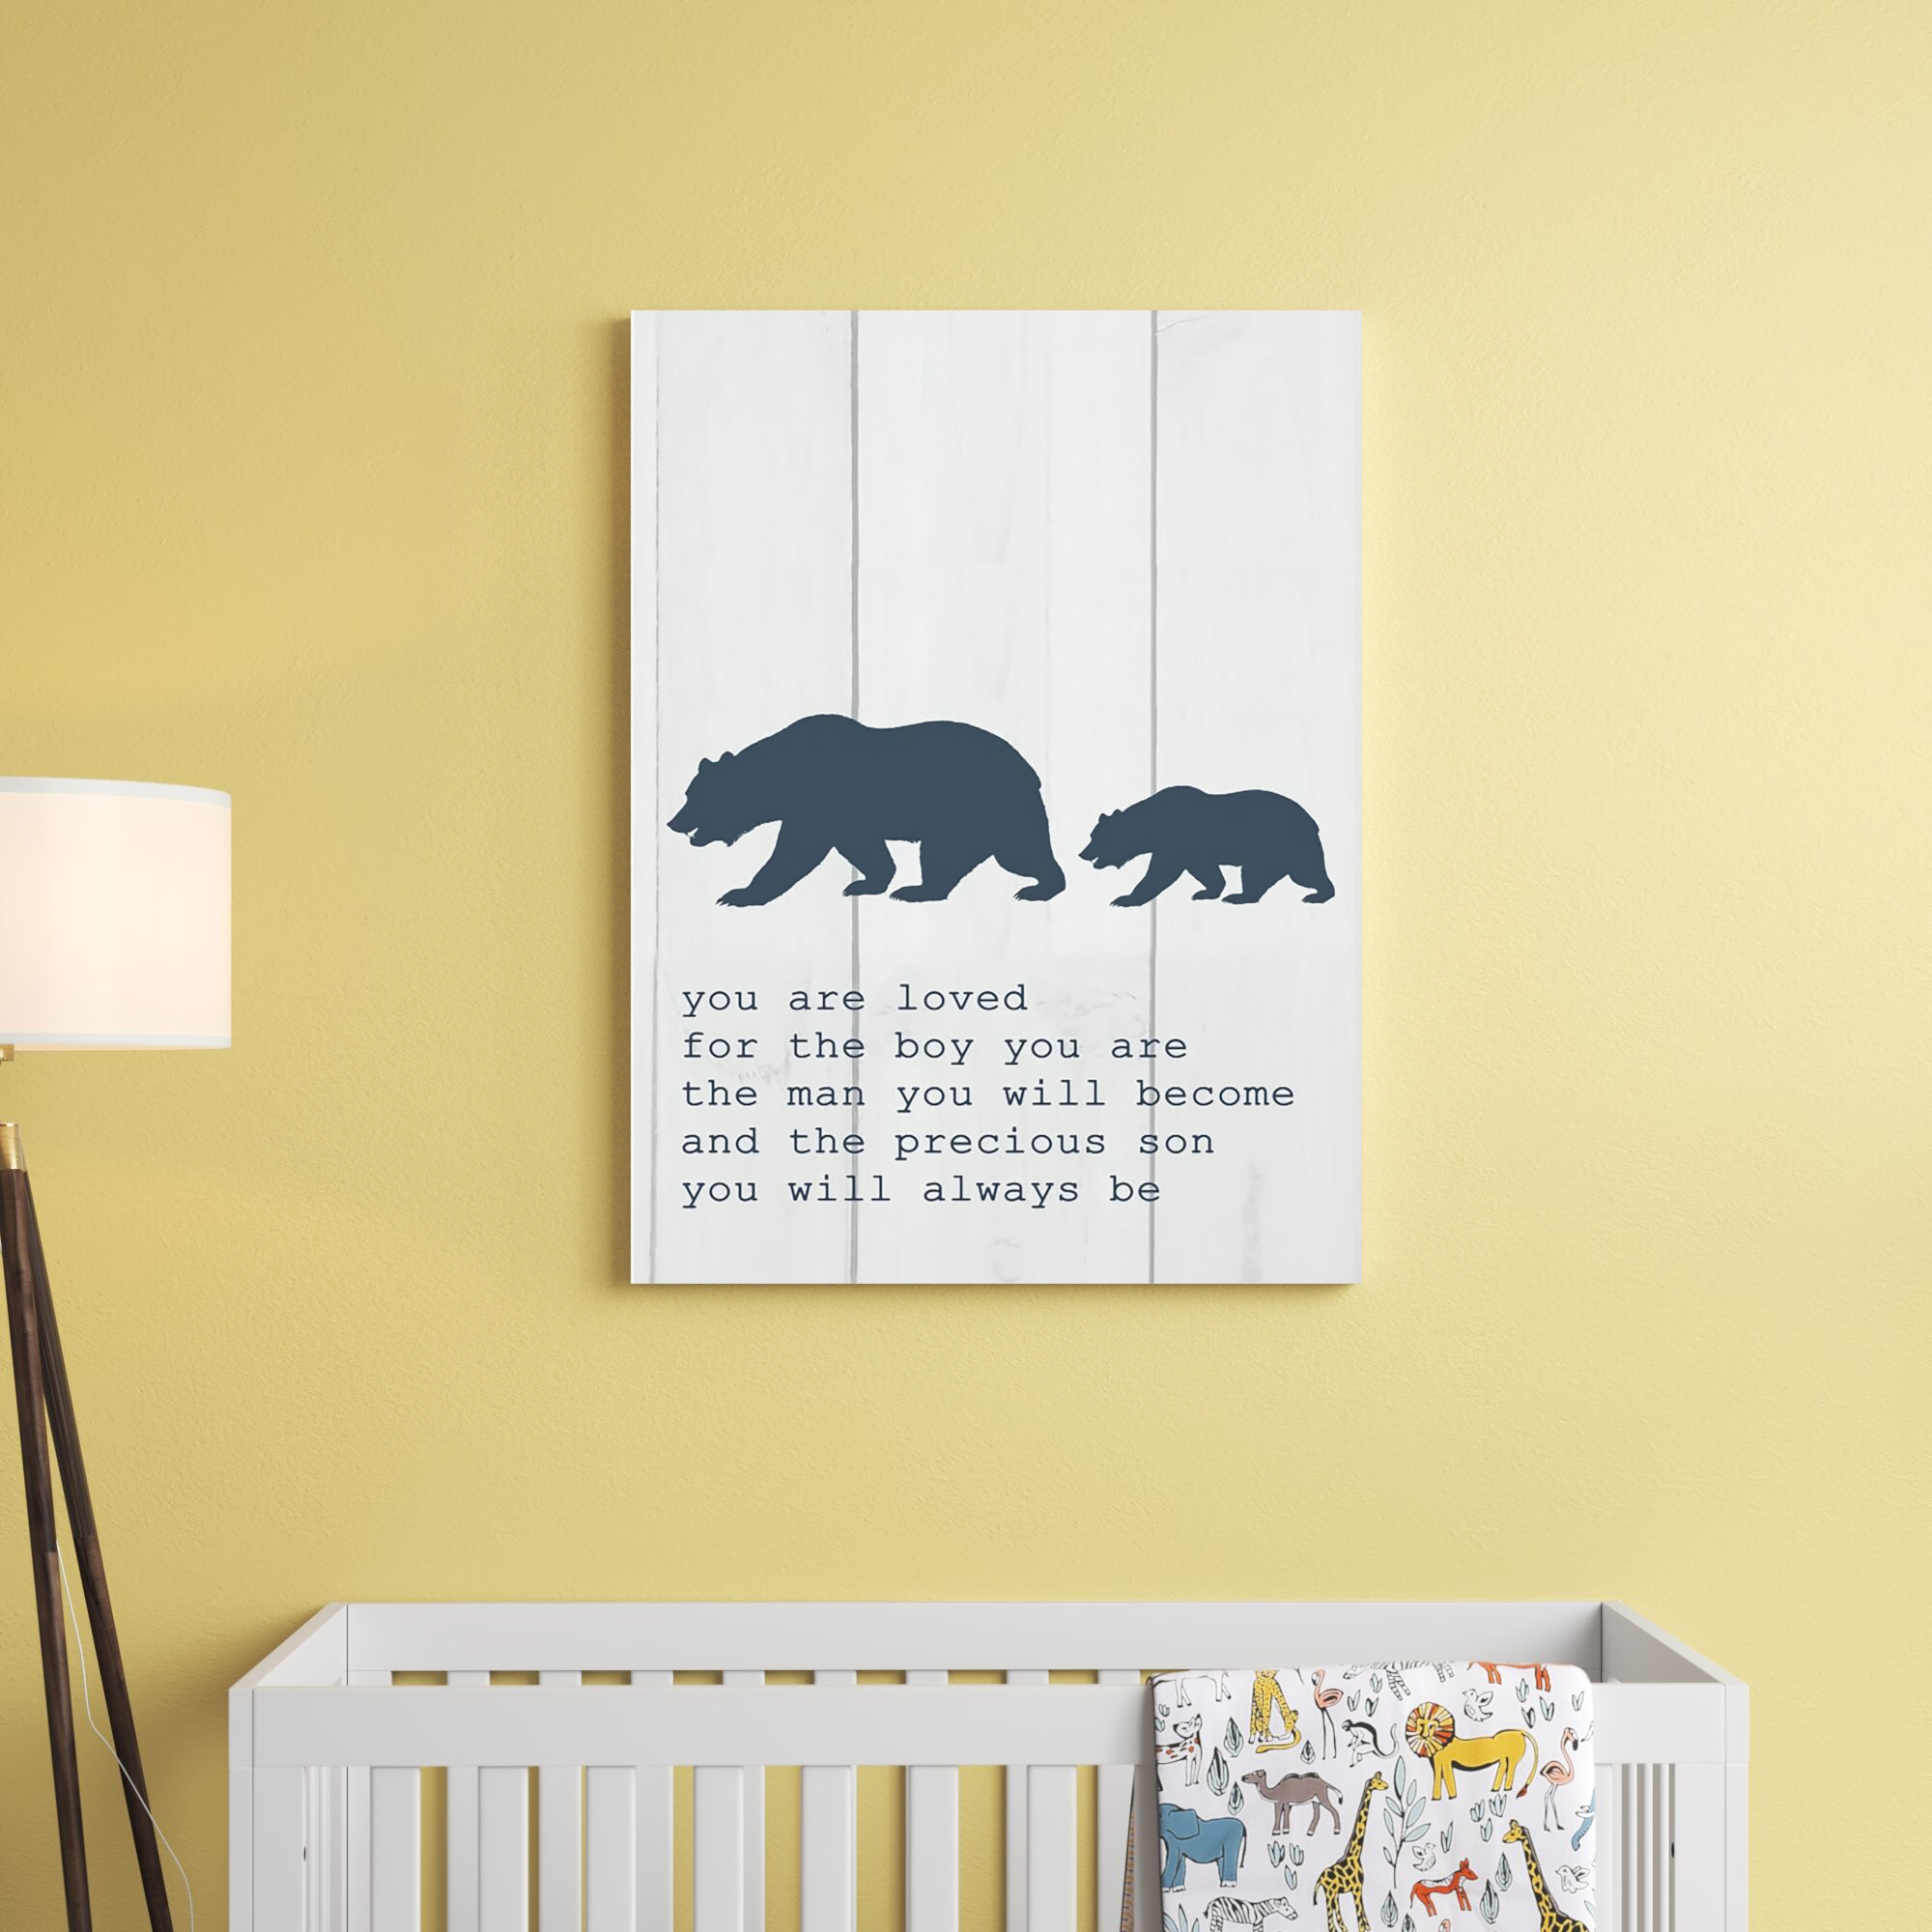 Lessing Inspirational Word Bear Family Kids Wall Décor Redwood Rover Format: Wrapped Canvas, Size: 40 H x 30 W x 1.5 D